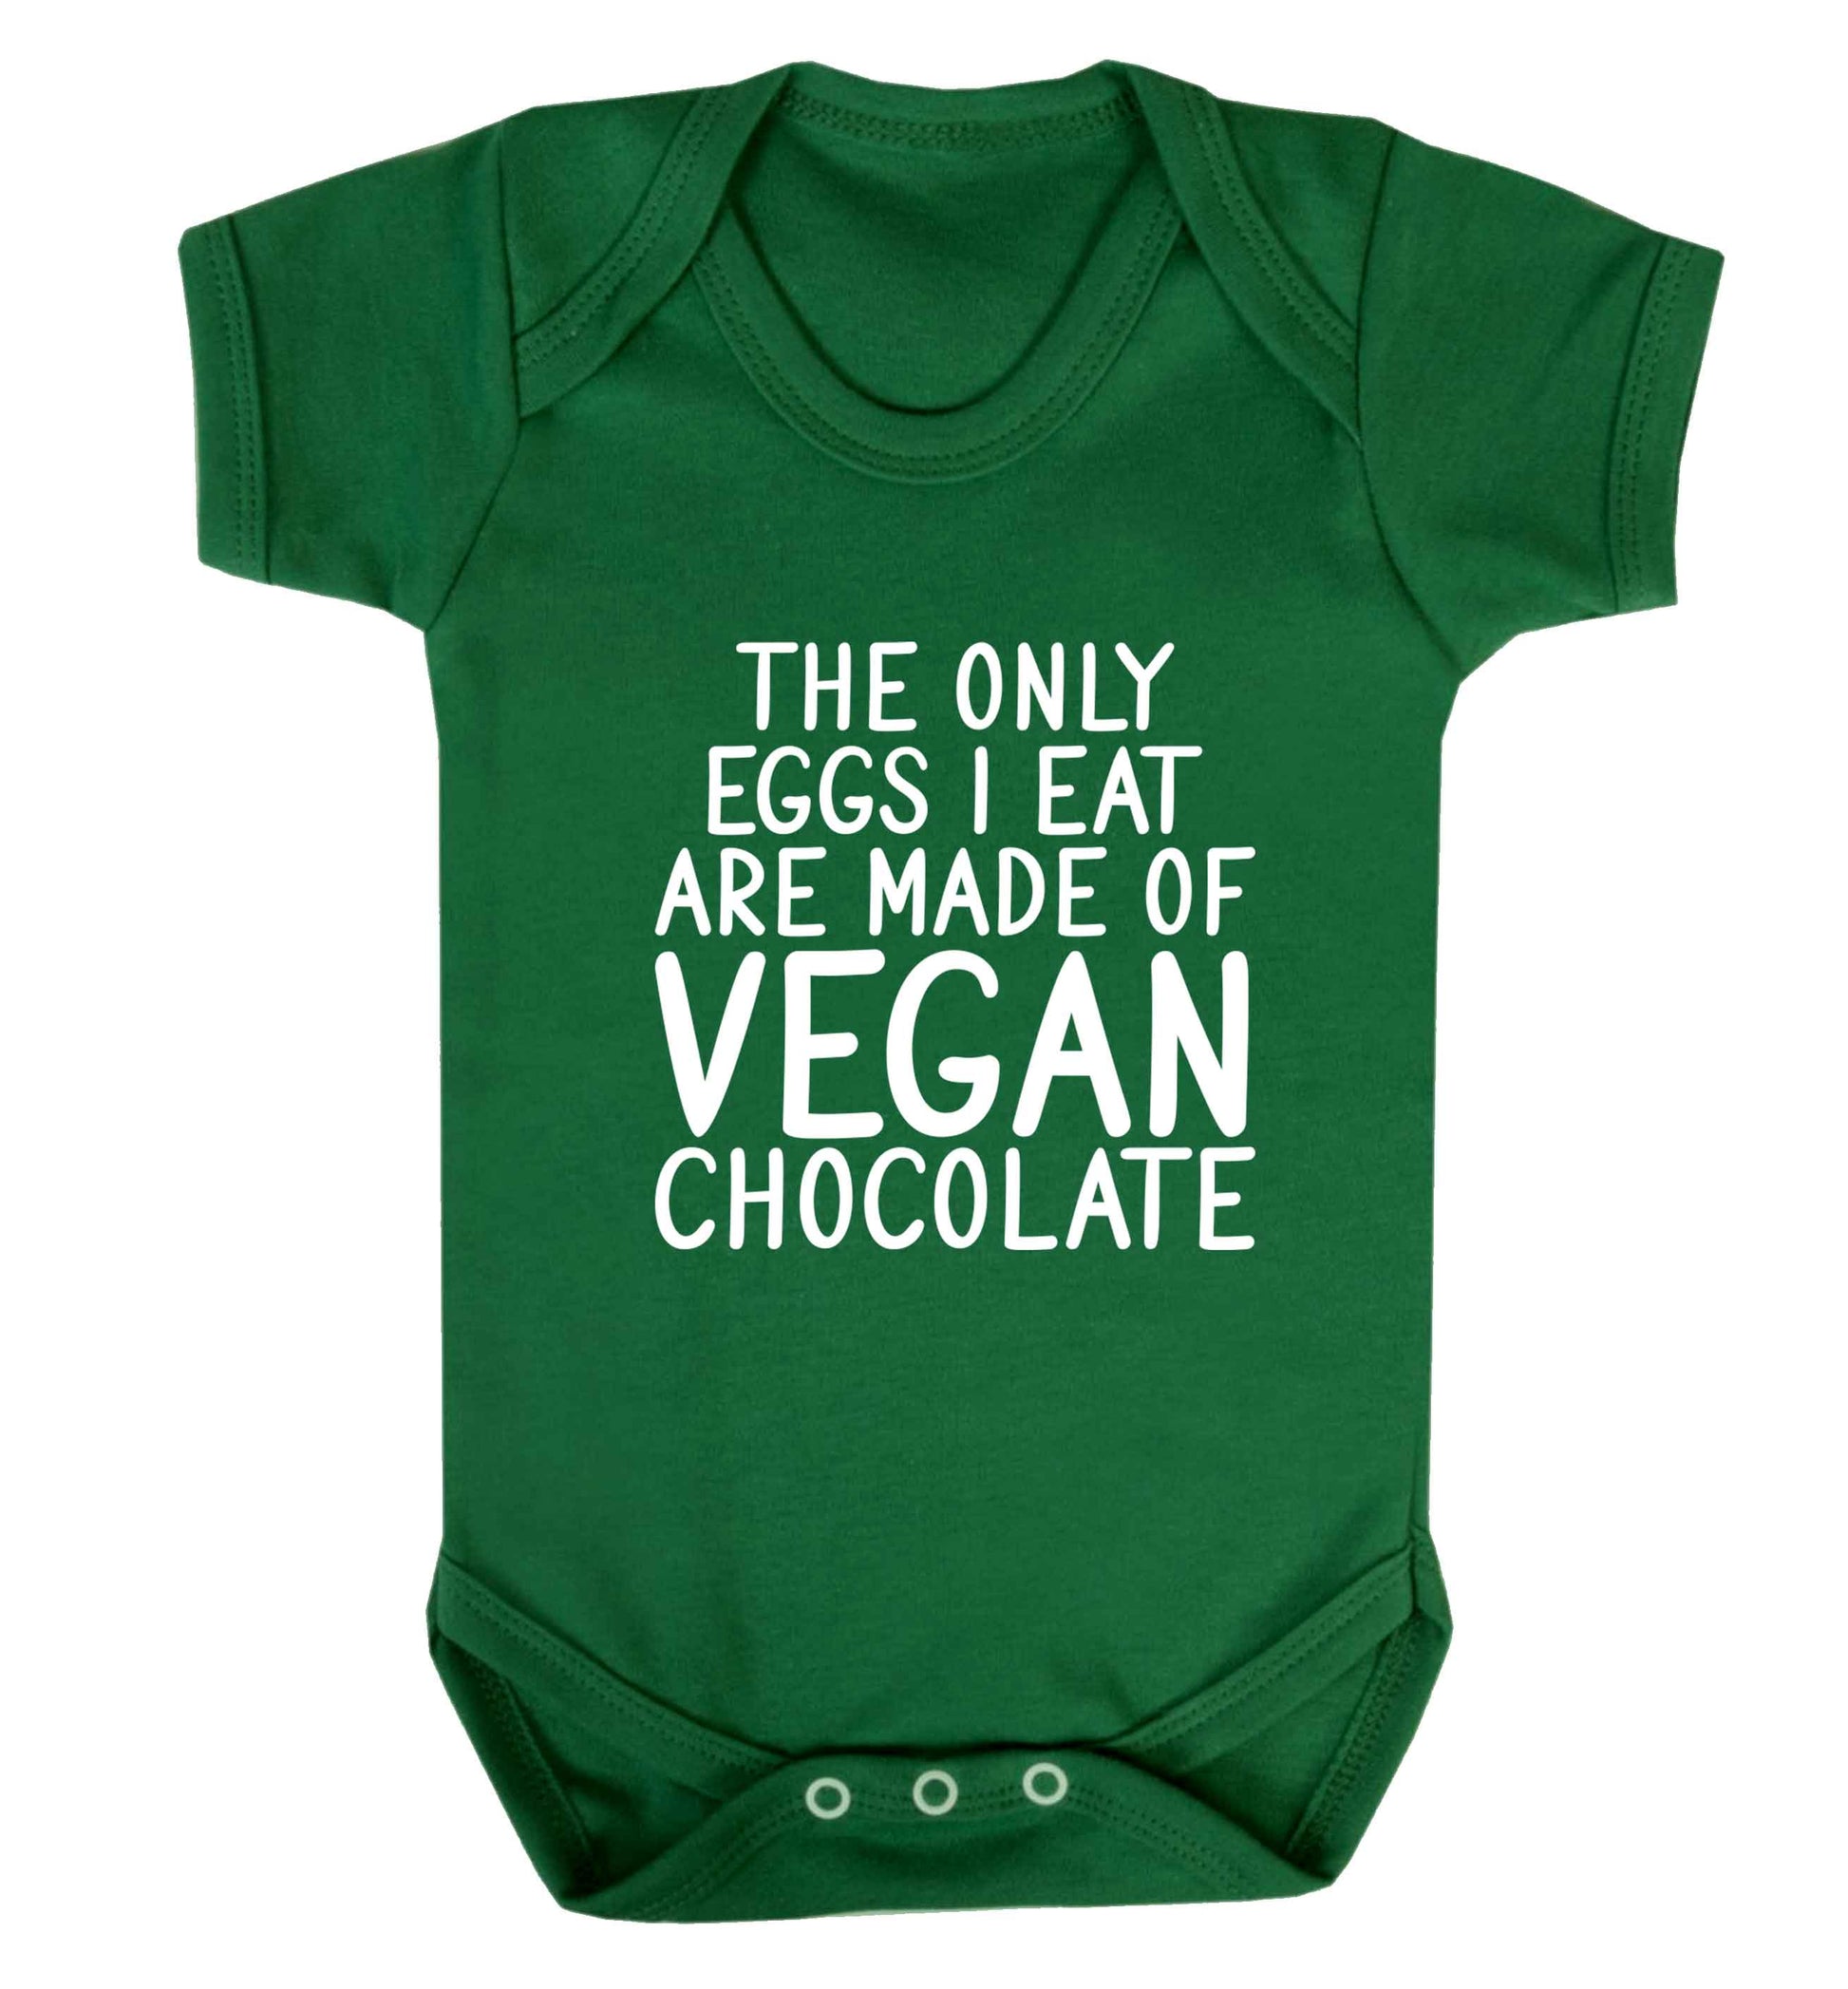 The only eggs I eat are made of vegan chocolate baby vest green 18-24 months